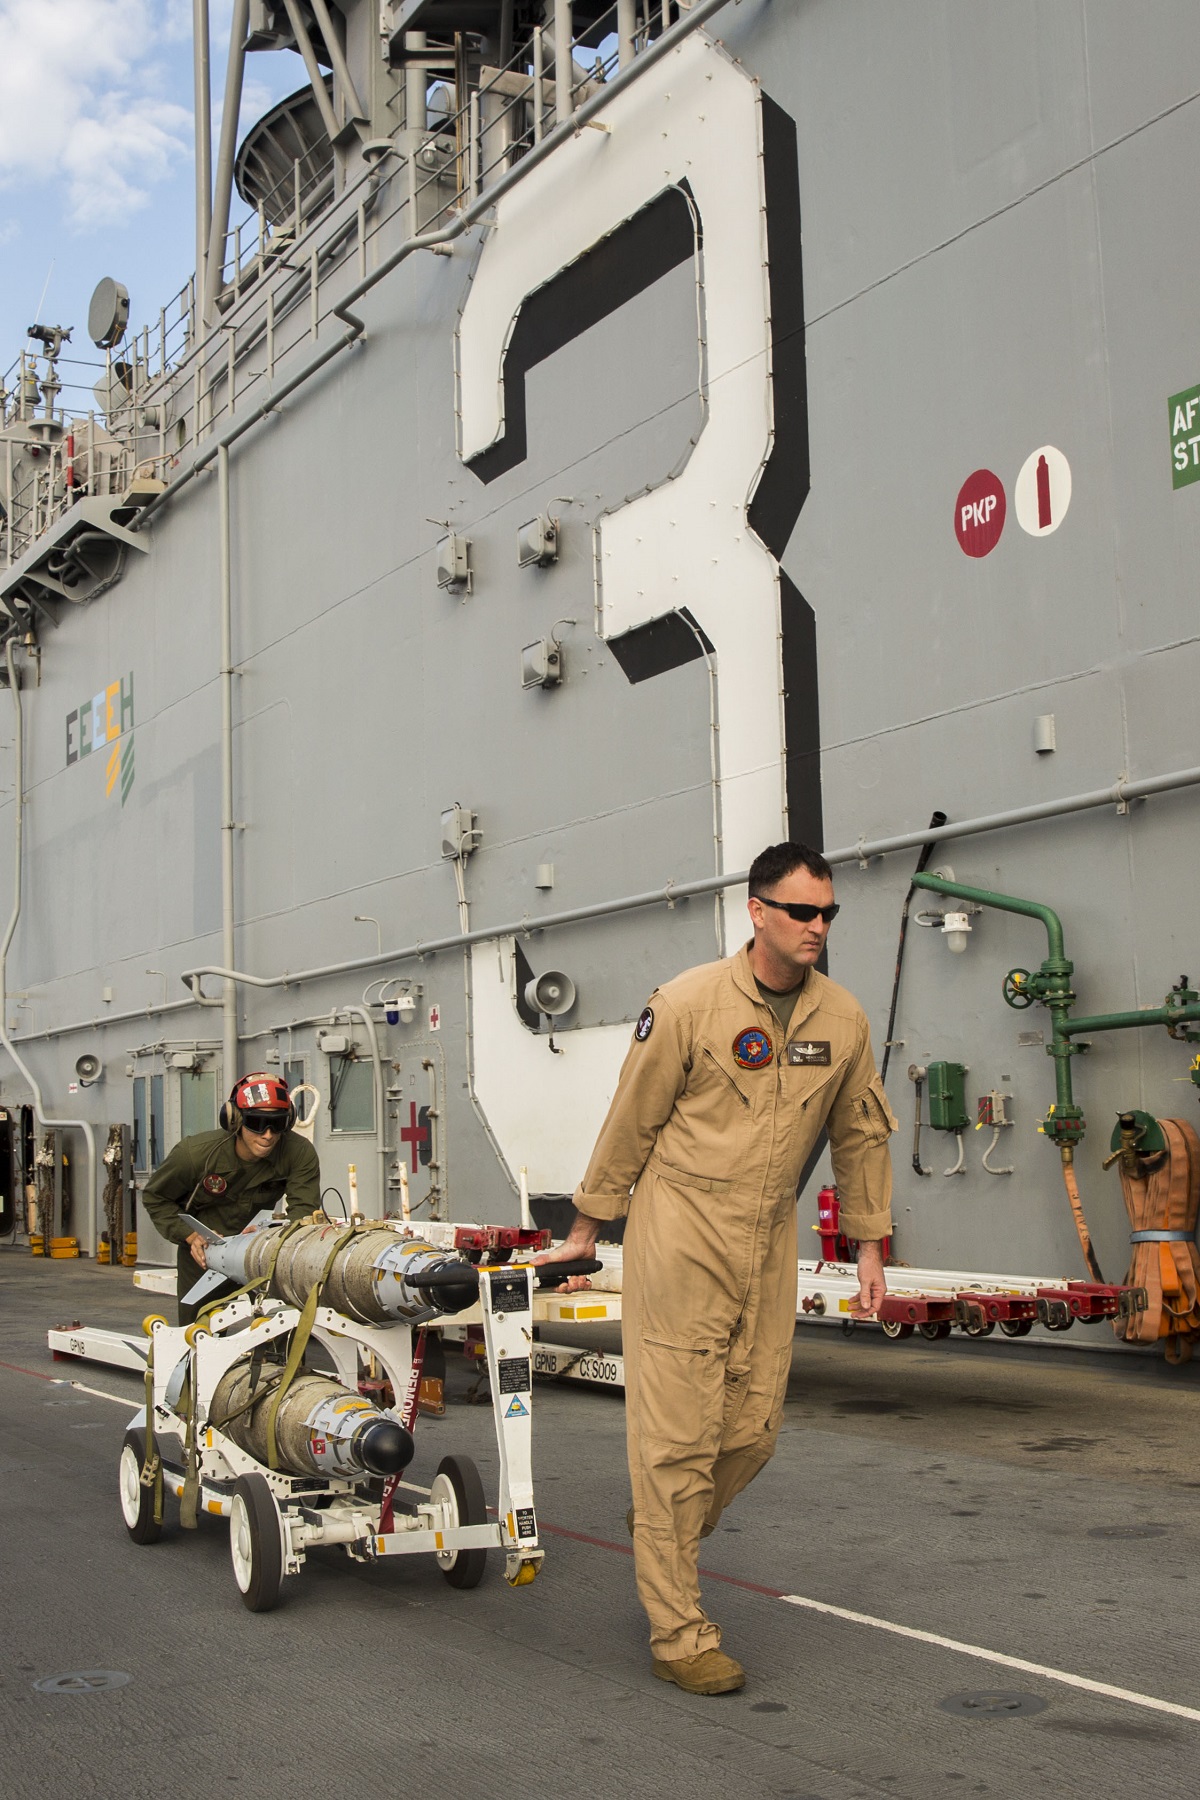 ARABIAN GULF (Dec. 4, 2015) Cpl. Douglass Valle (left), from Miami, and Chief Warrant Officer 2 Nickolas "Blu" Mendenhall, from Smithville, Texas, both assigned to the Air Combat Element (ACE) of the embarked 26th Marine Expeditionary Unit (MEU), transport ordnance on the flight deck of the amphibious assault ship USS Kearsarge (LHD 3). Kearsarge is deployed to the U.S. 5th Fleet, supporting Operation Inherent Resolve, the effort to degrade and ultimately destroy ISIL; maritime security operations, and regional theater security cooperation efforts.  U.S. Navy photo by Mass Communication Specialist Seaman Apprentice Ryre Arciaga